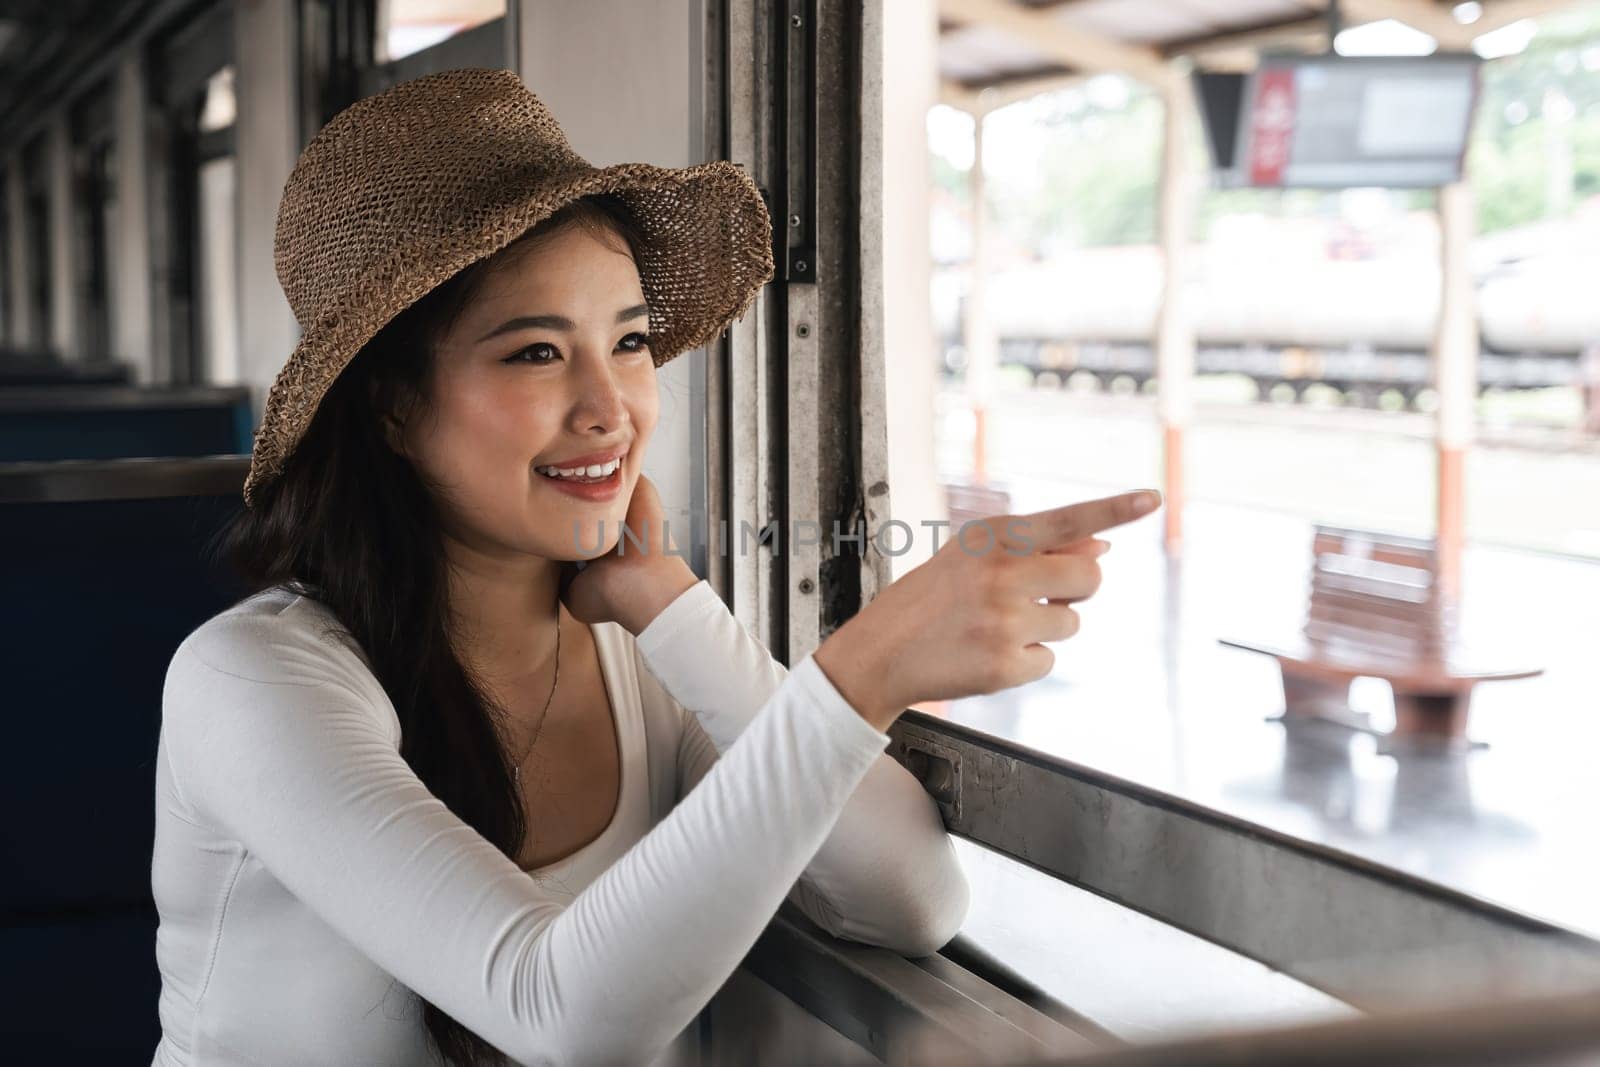 Asian woman pointing out train window with excitement, concept of exploration.